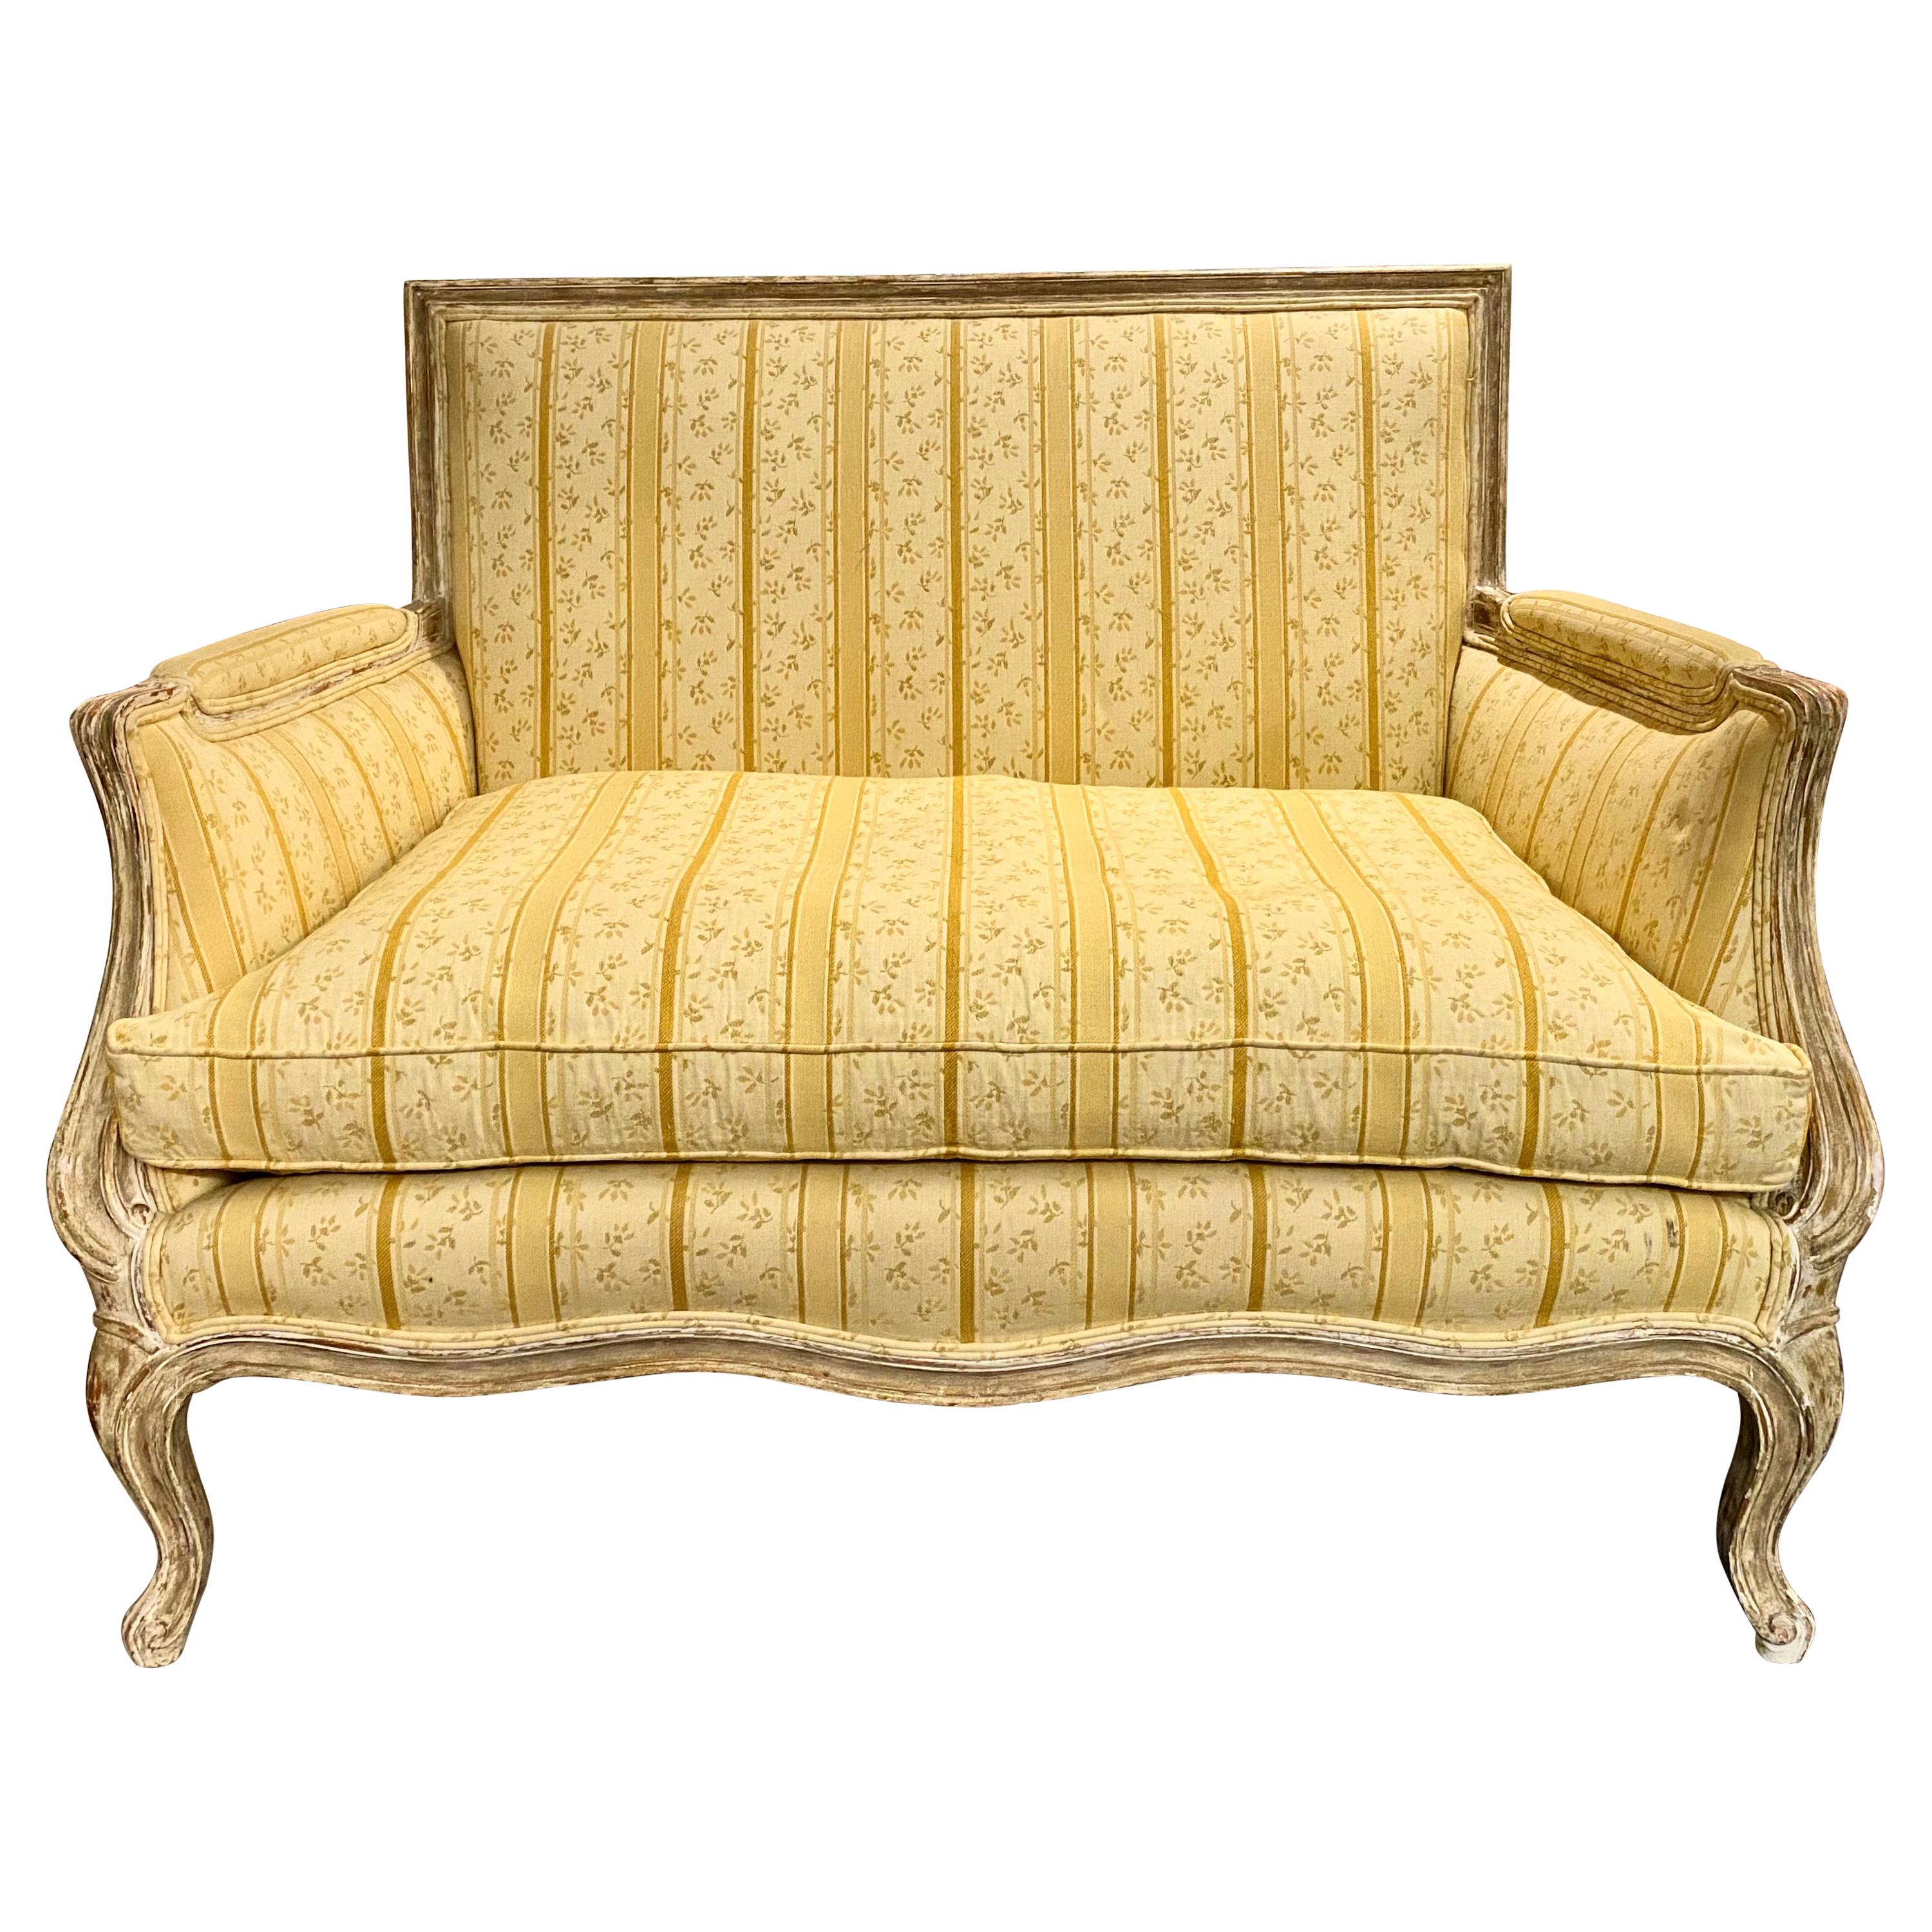 French Louis XV Transition Provençal Settee